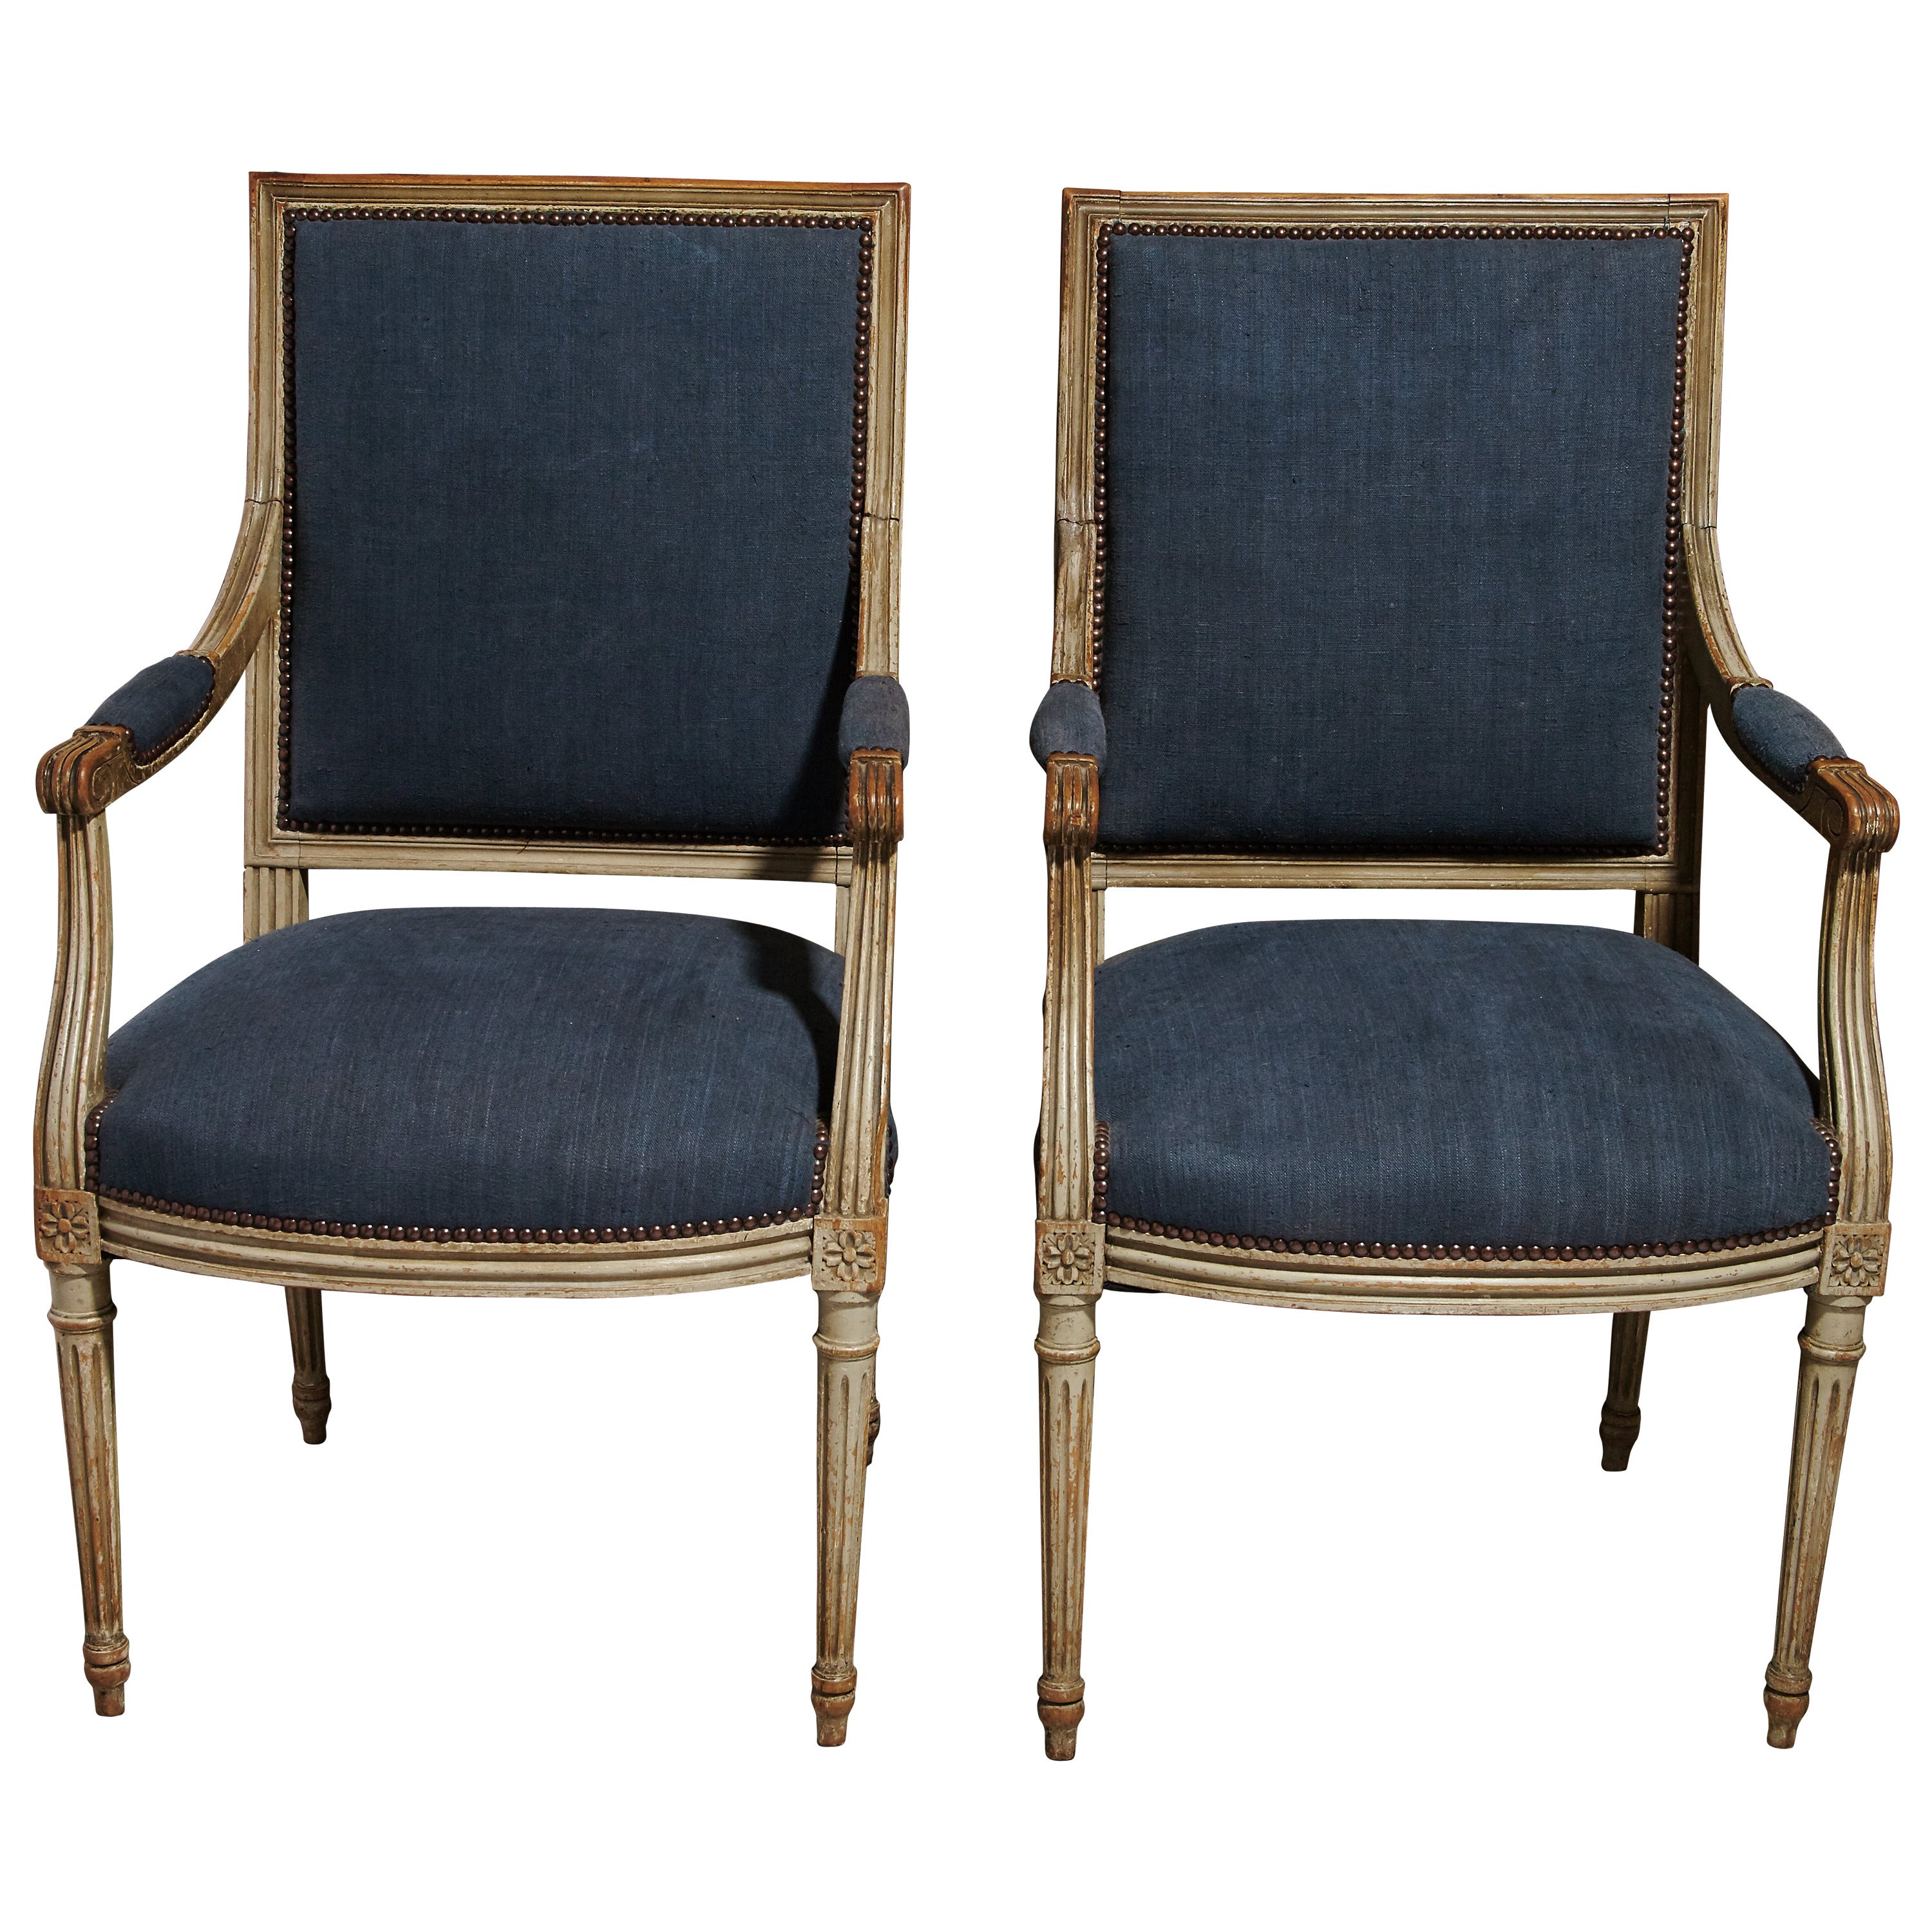 Pair of Painted Louis XVI Style Fauteuils